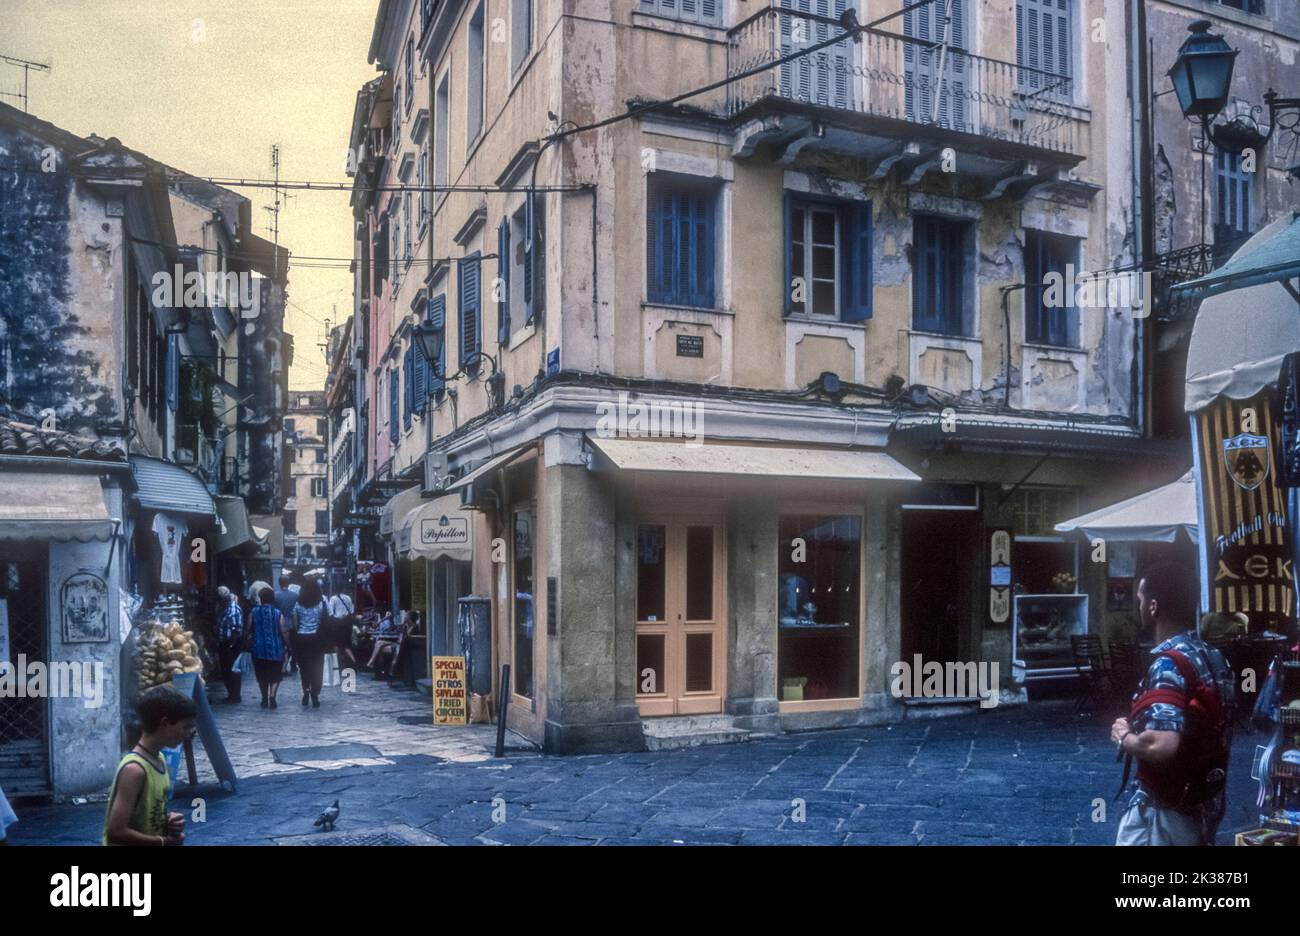 1998 archive photograph of Corfu Town. Stock Photo